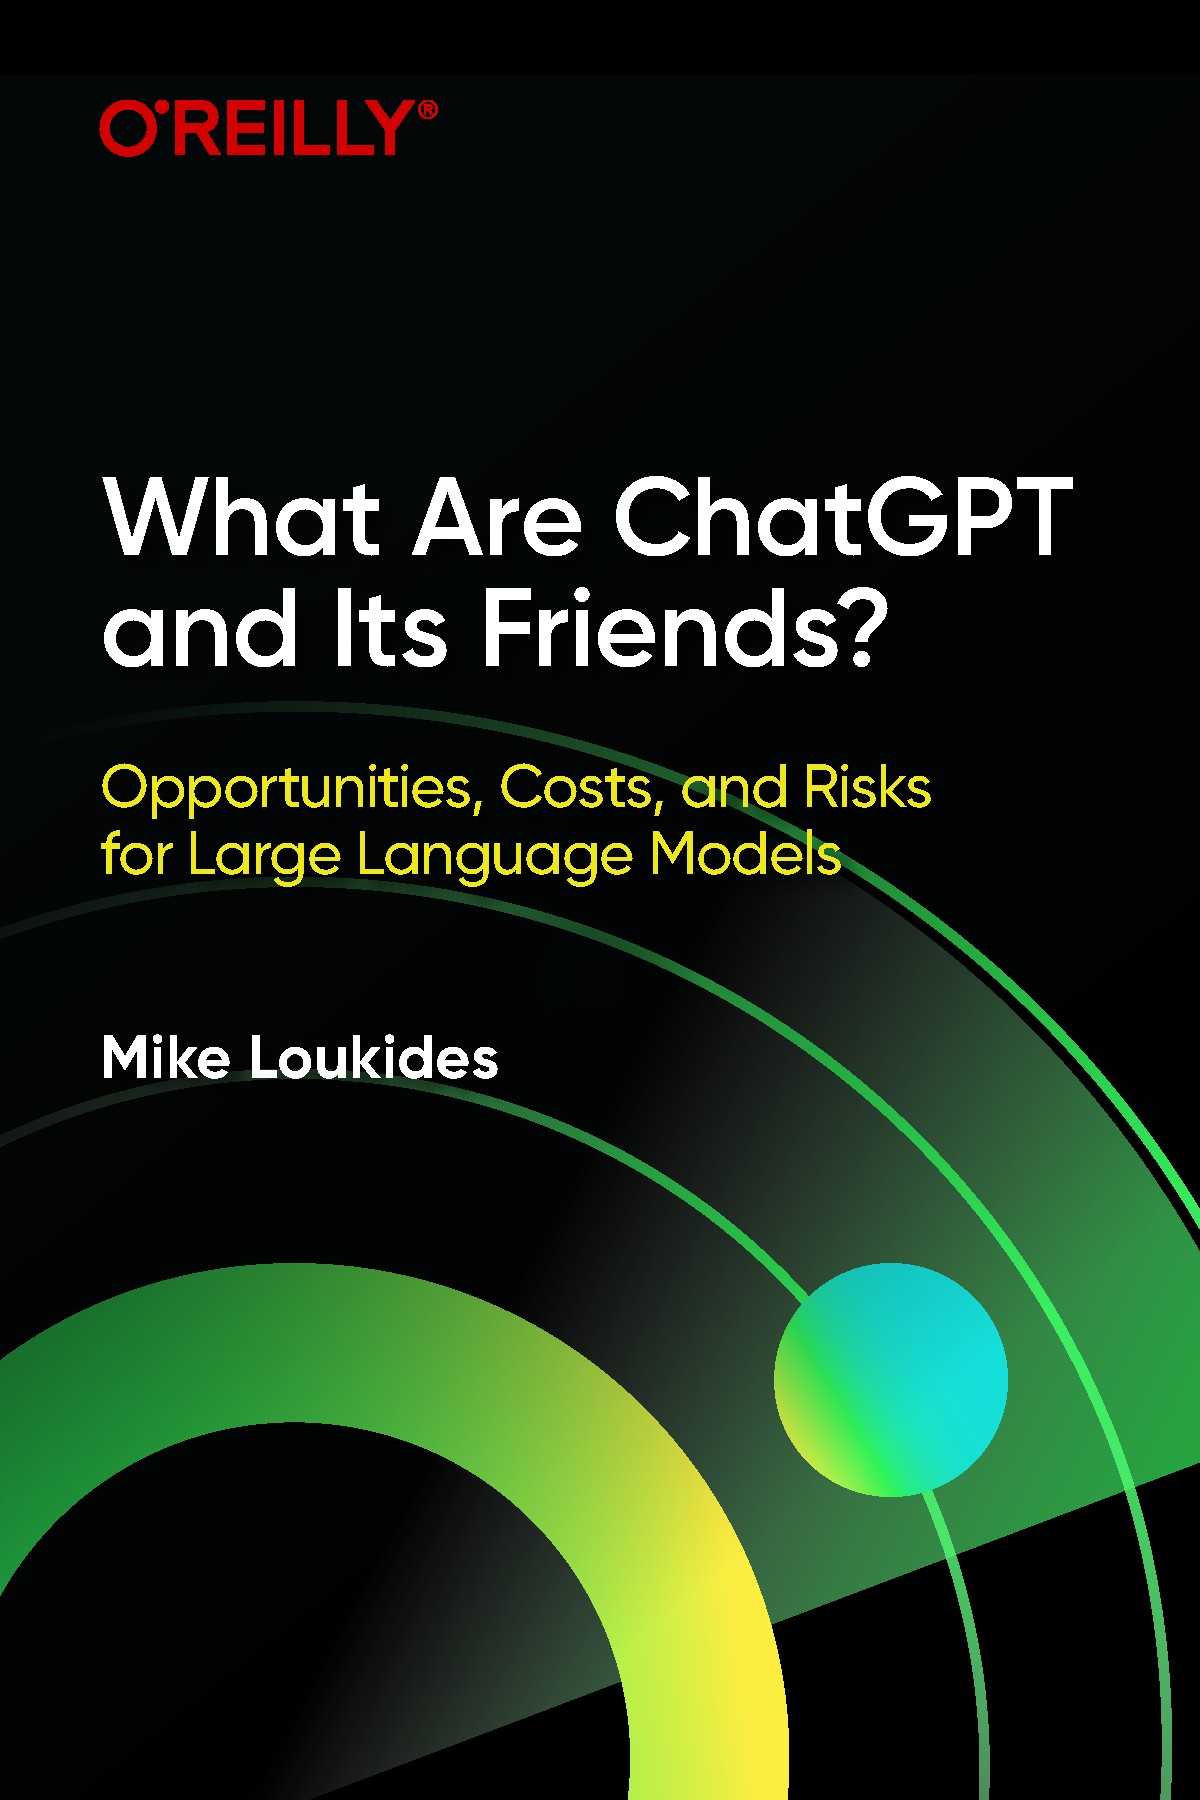 What Are ChatGPT and Its Friends?